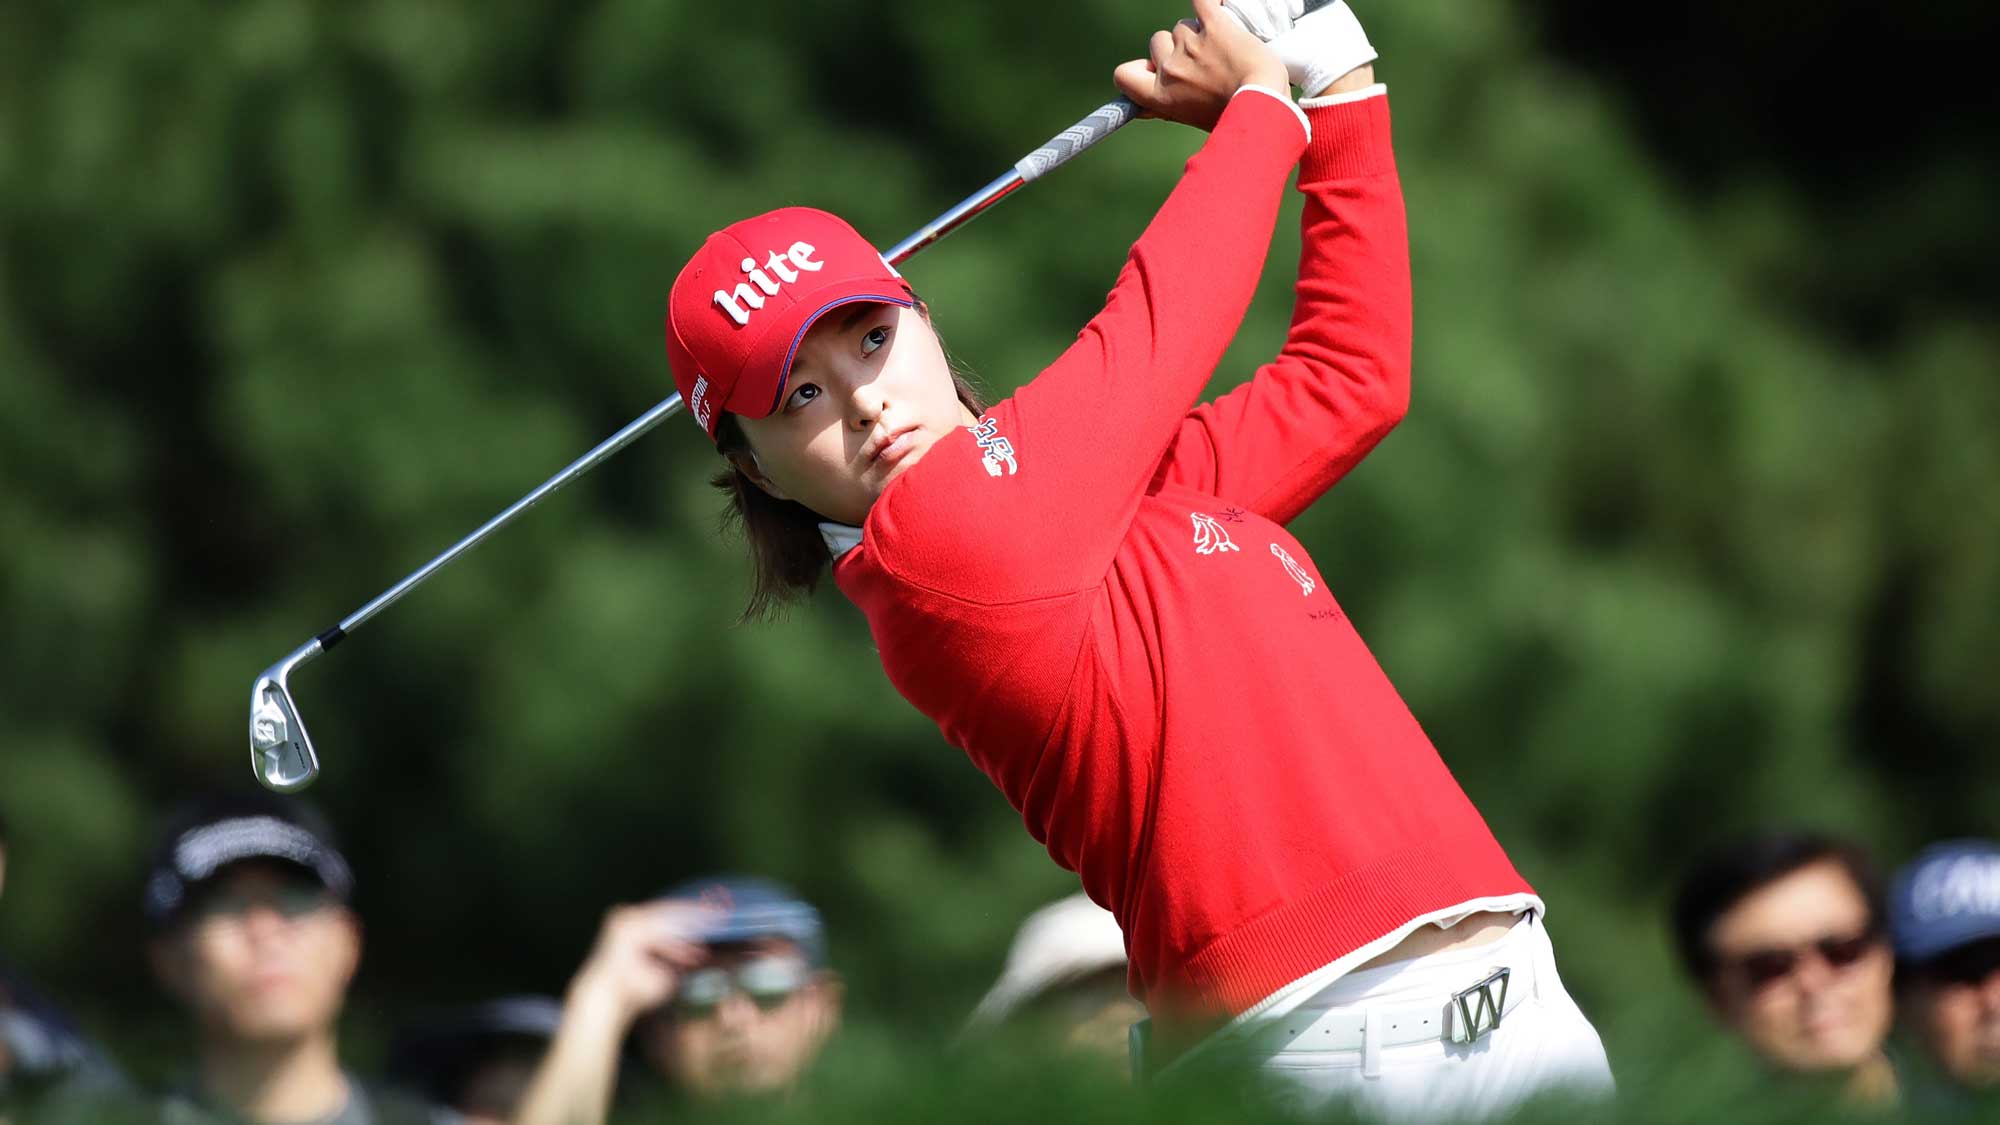 Jin-Young Ko of South Korea plays a tee shot on the 2nd hole during the third round of the LPGA KEB Hana Bank Championship